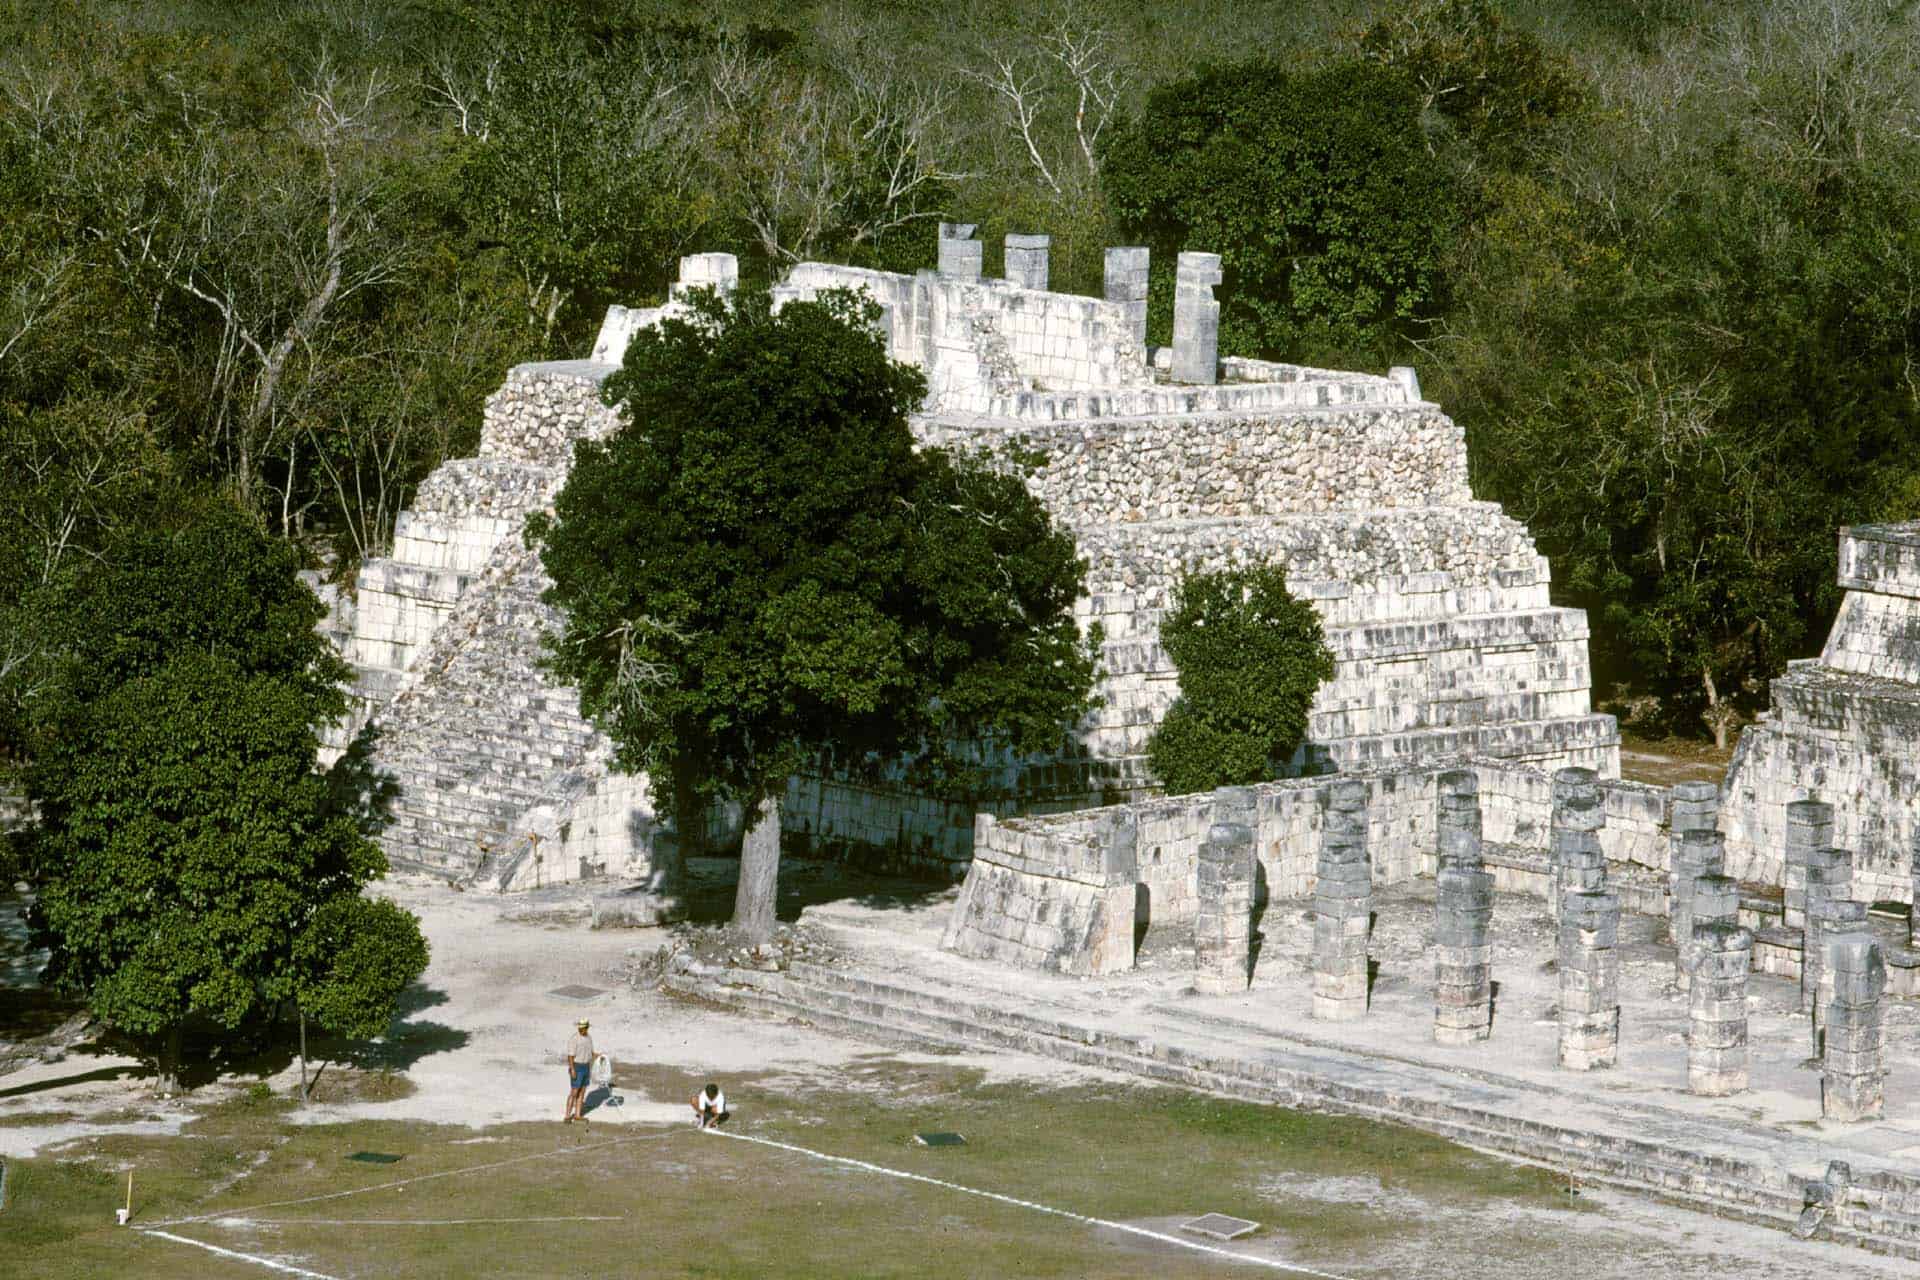 Mayan Ruins in Chichen Itza, Mexico - Temple of Tables